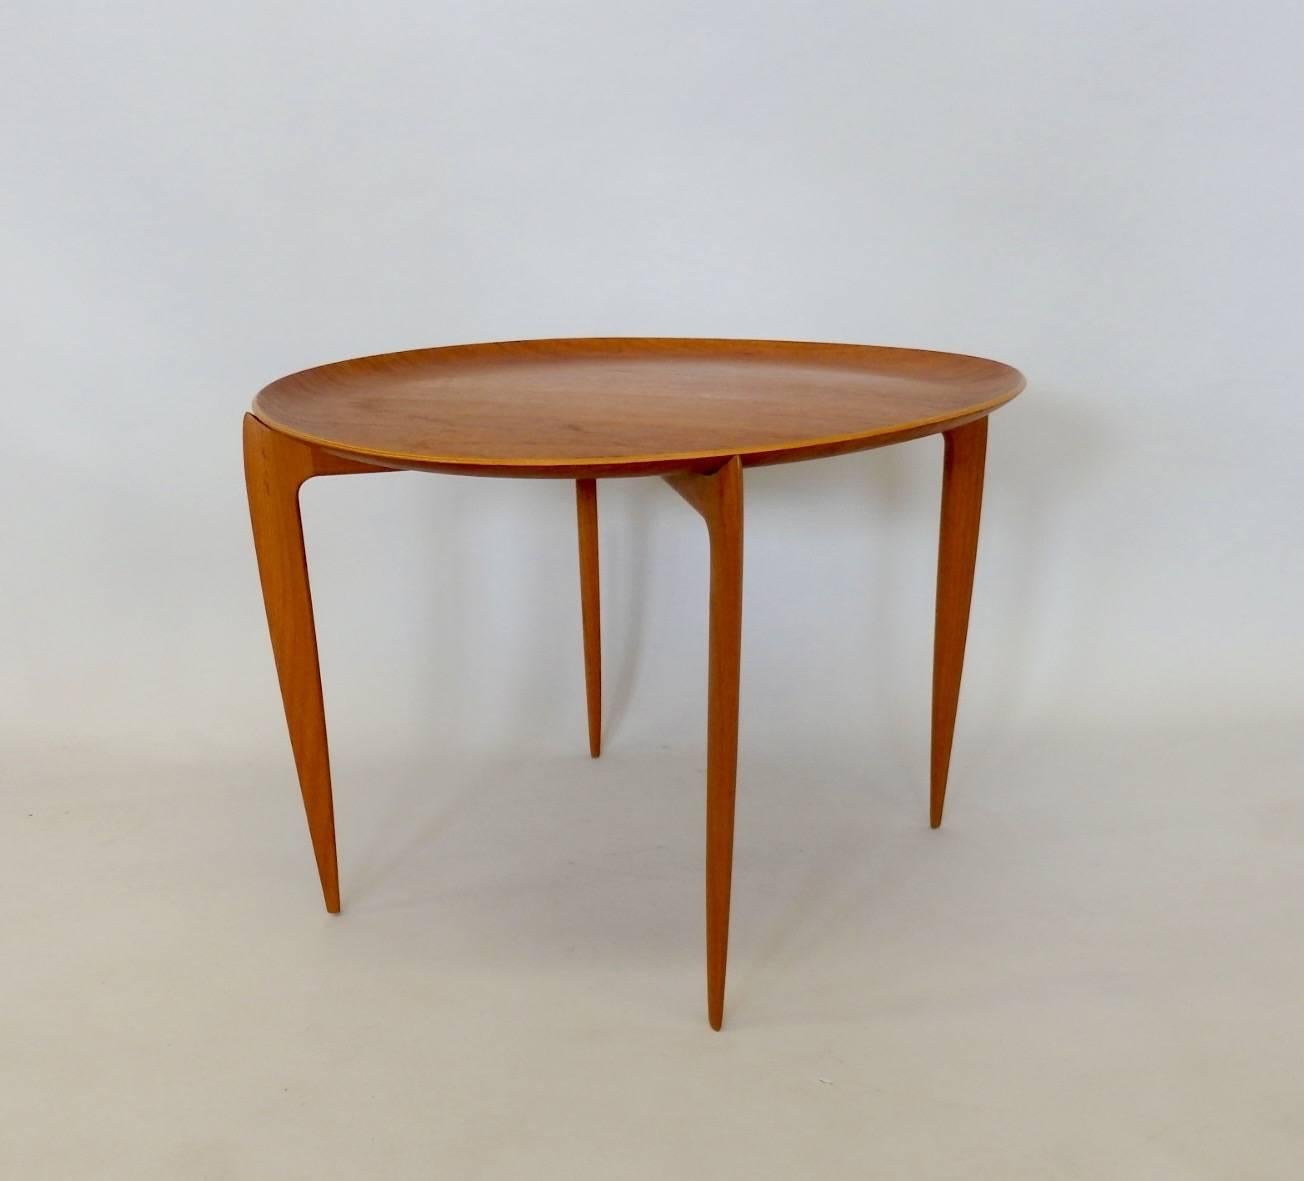 Willumsen and Engholm fold up base tray table for Fritz Hansen. Very nice original condition. Base is solid teak removable tray top is teak laminate wood.